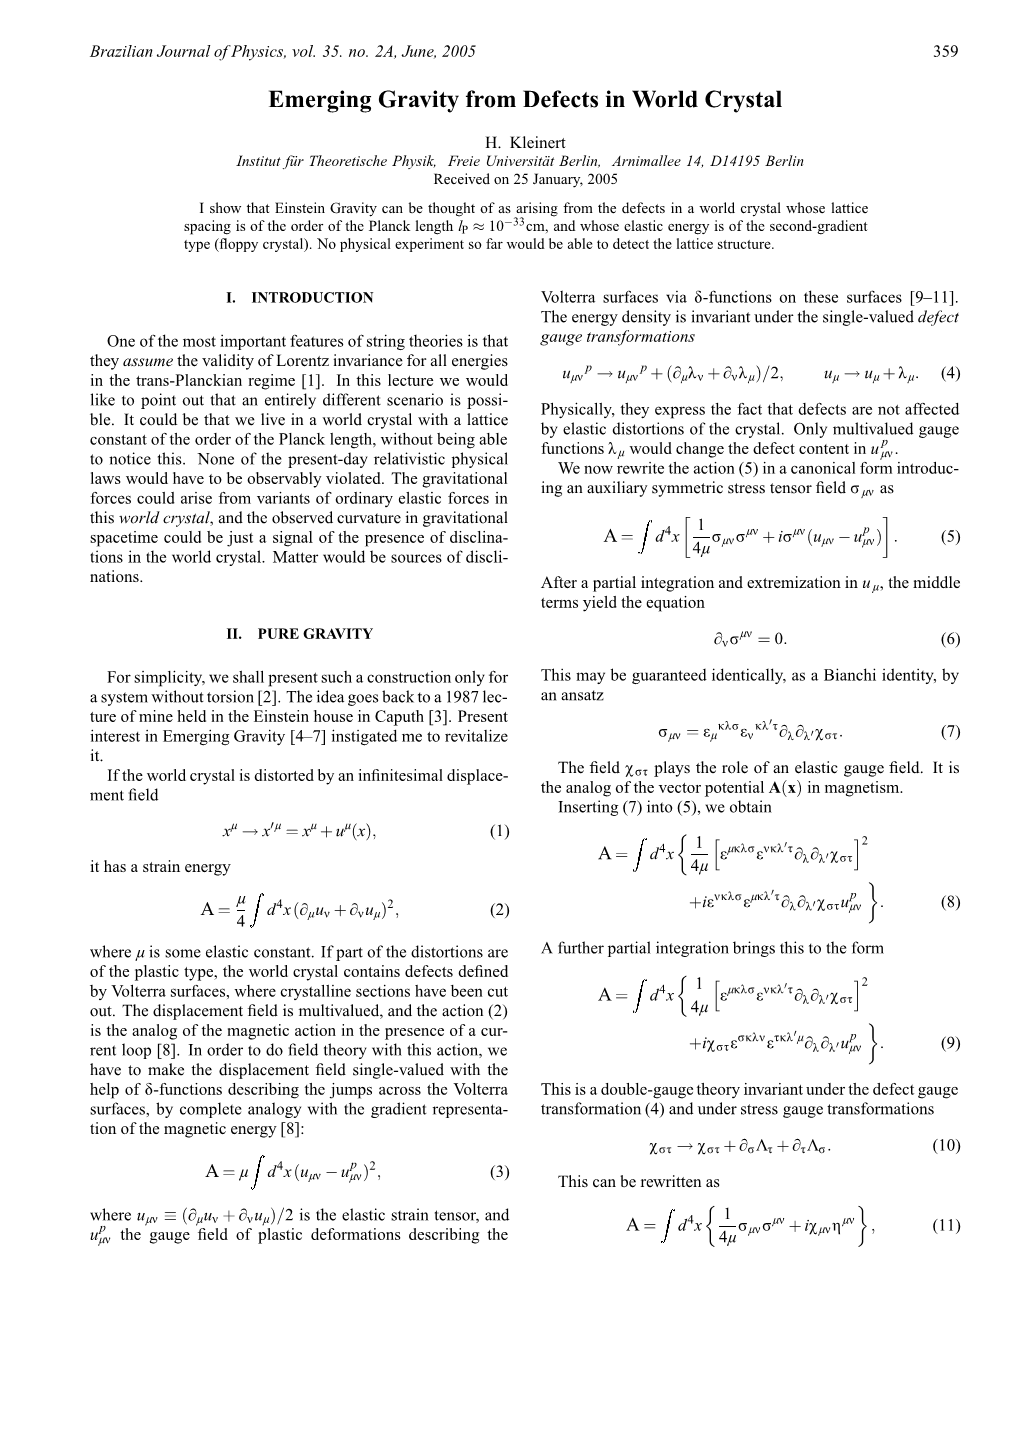 [359] H. Kleinert Emerging Gravity from Defects in World Crystal